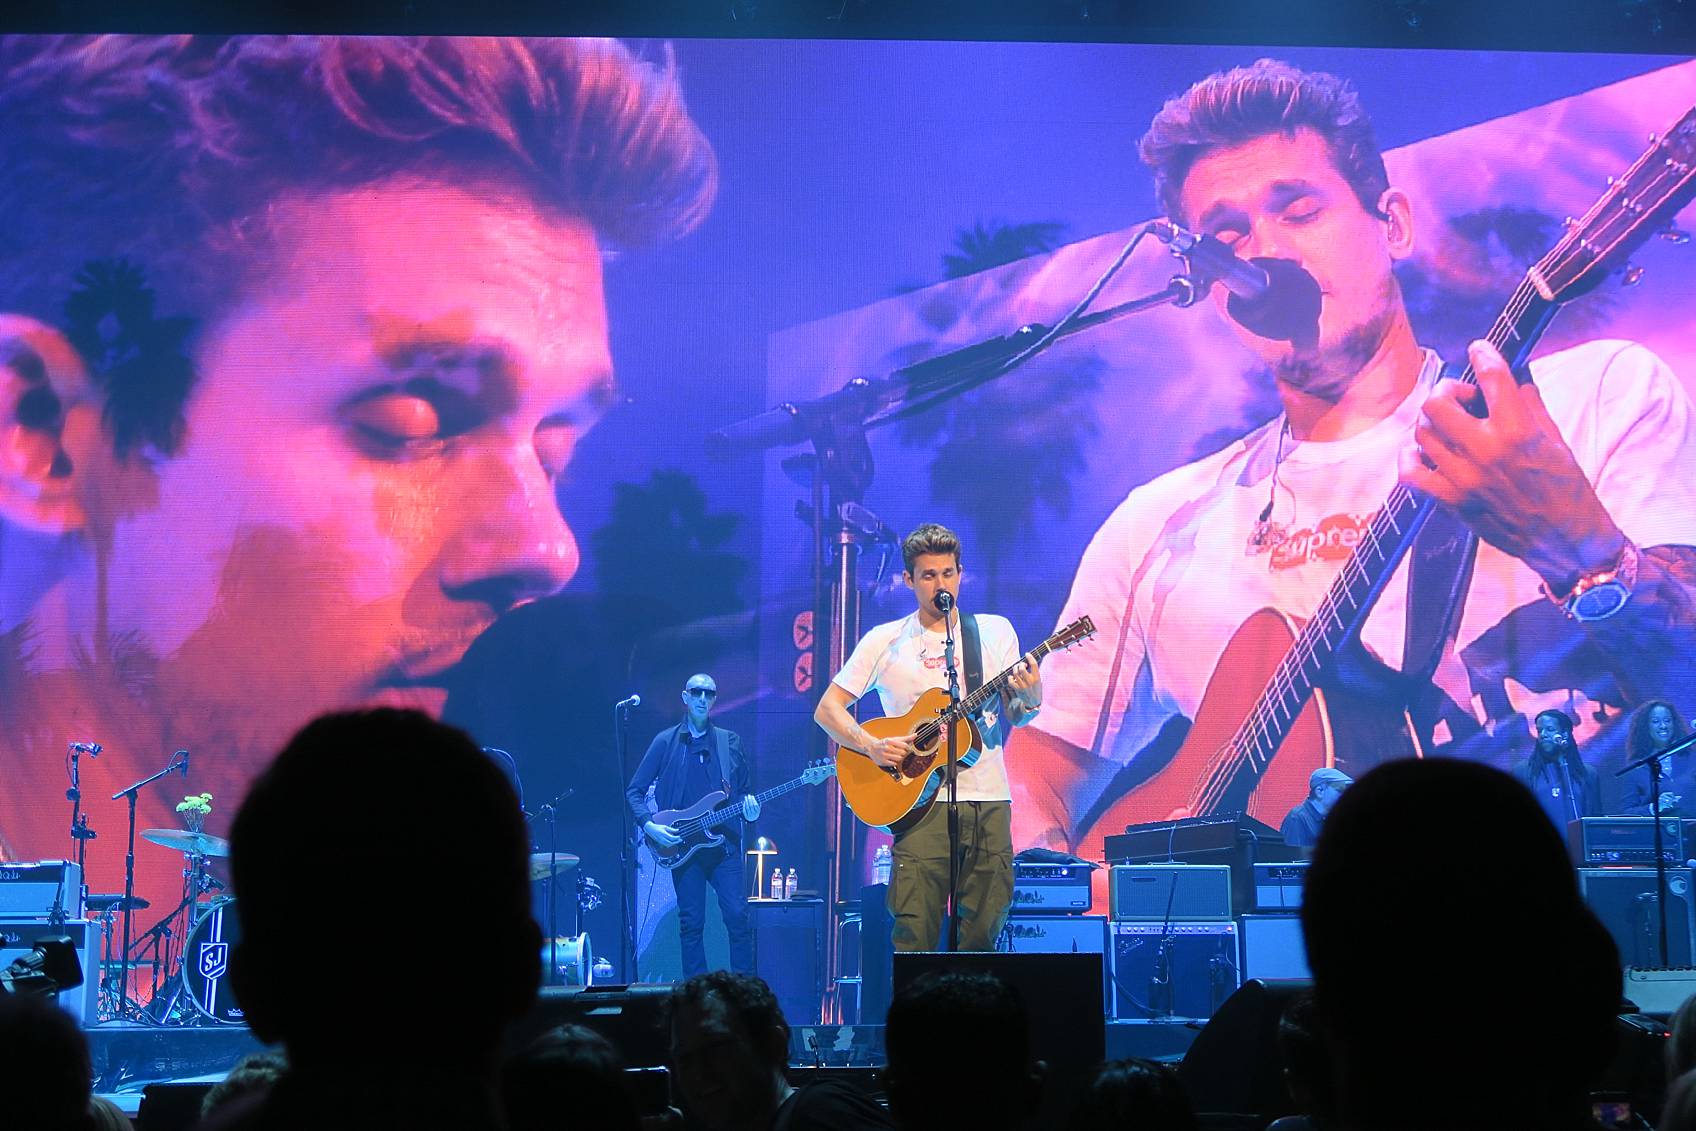 John Mayer performing in Phoenix on stage for his The Search for Everything Tour several spotlights on him